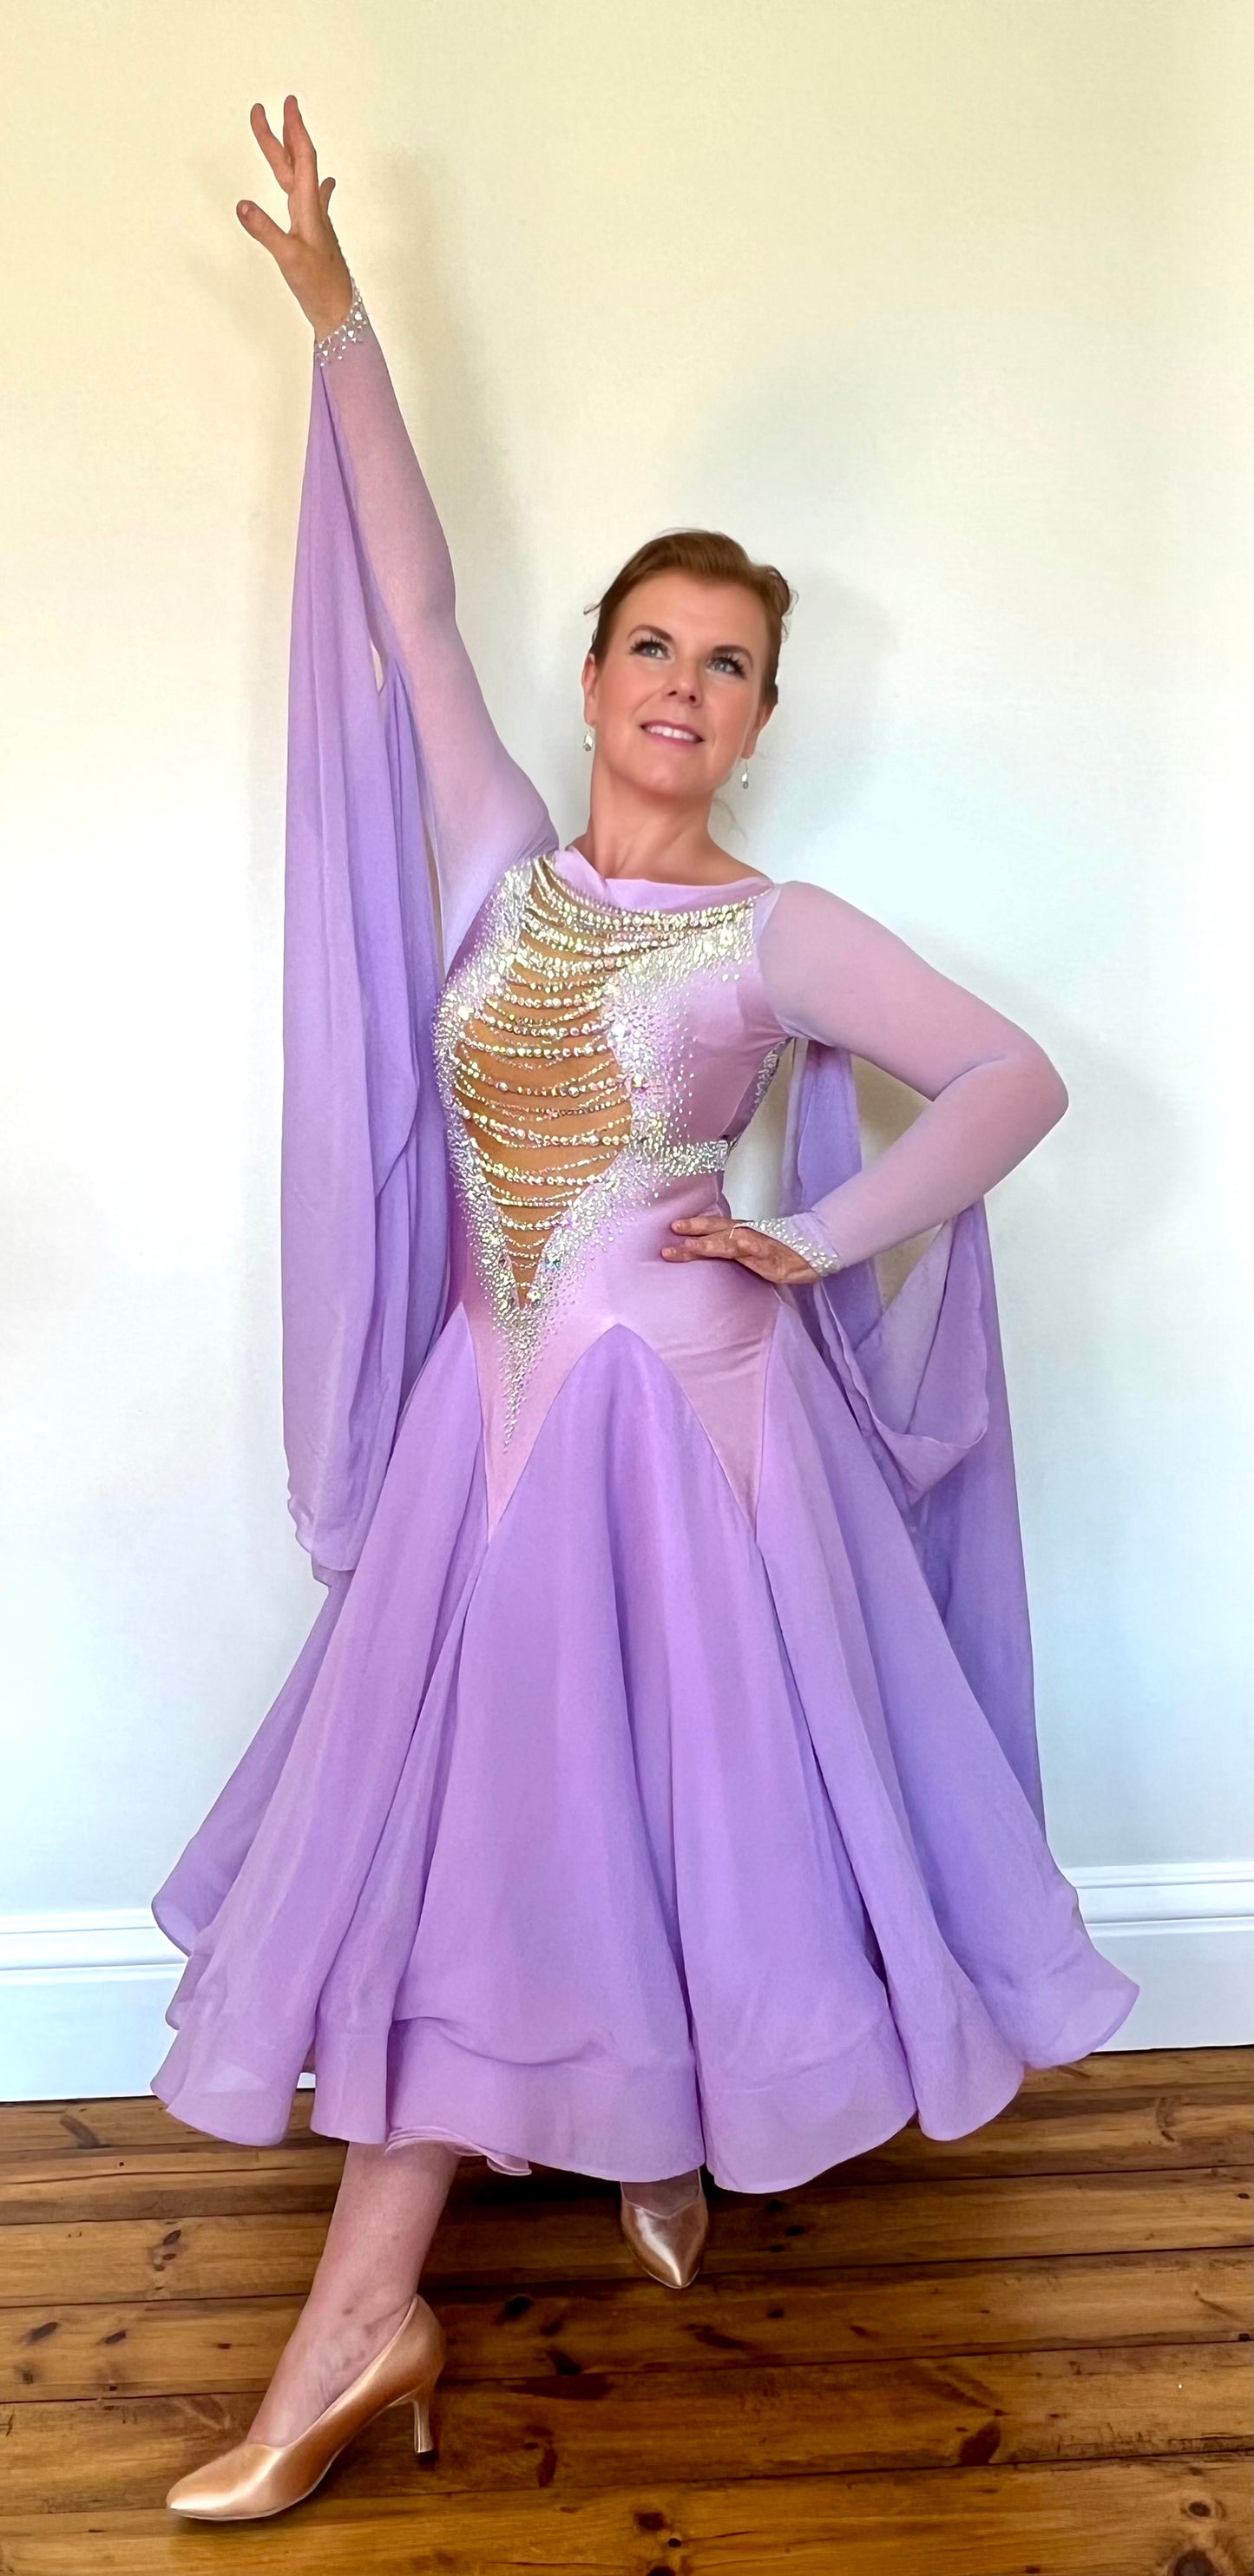 035 Lilac & Tan Ballroom Dress. Decorated in AB stones and pearl beading detail to the front & back